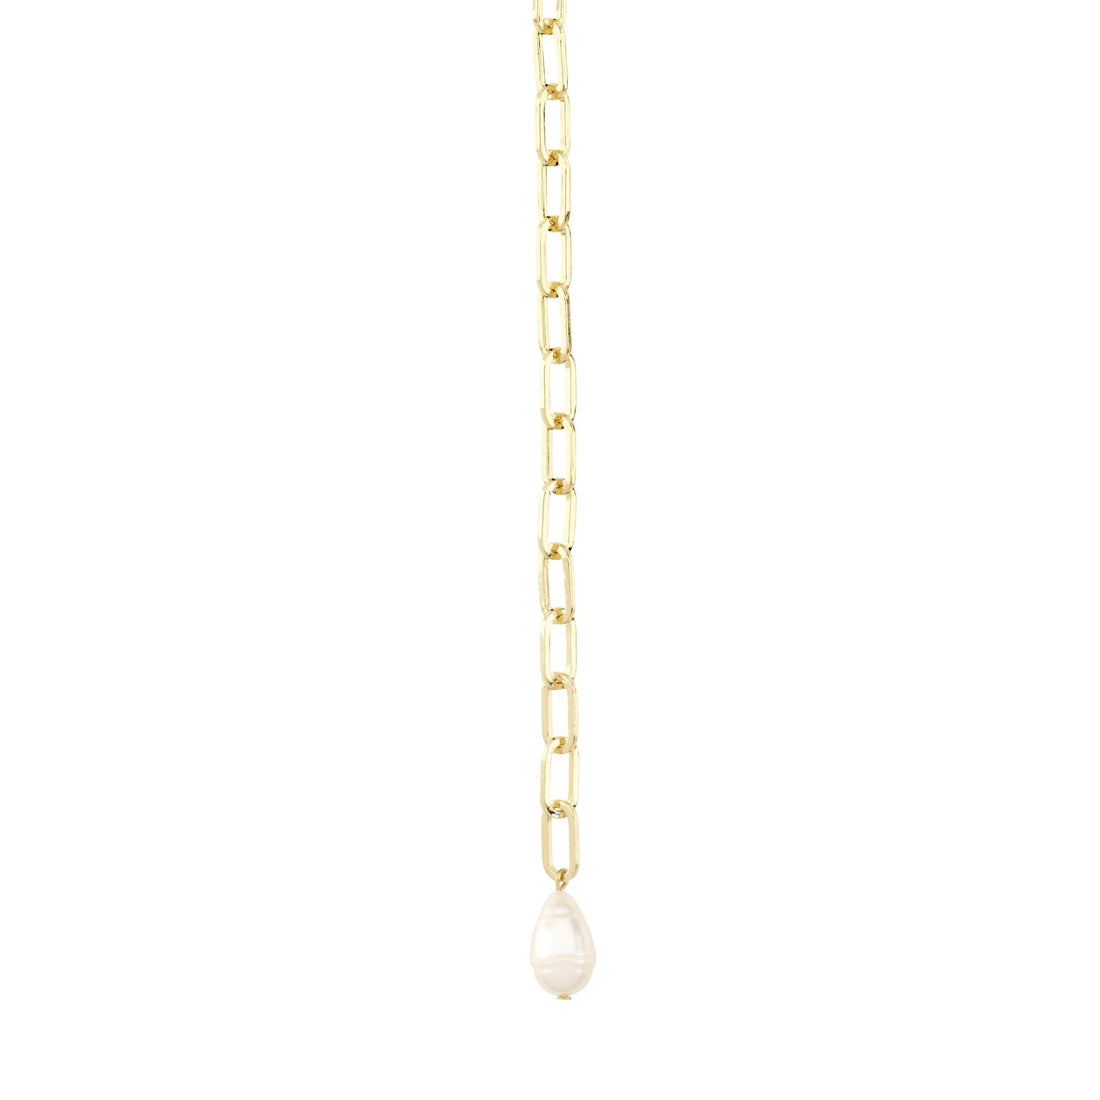 HEAT Recycled Chain Necklace - PILGRIM